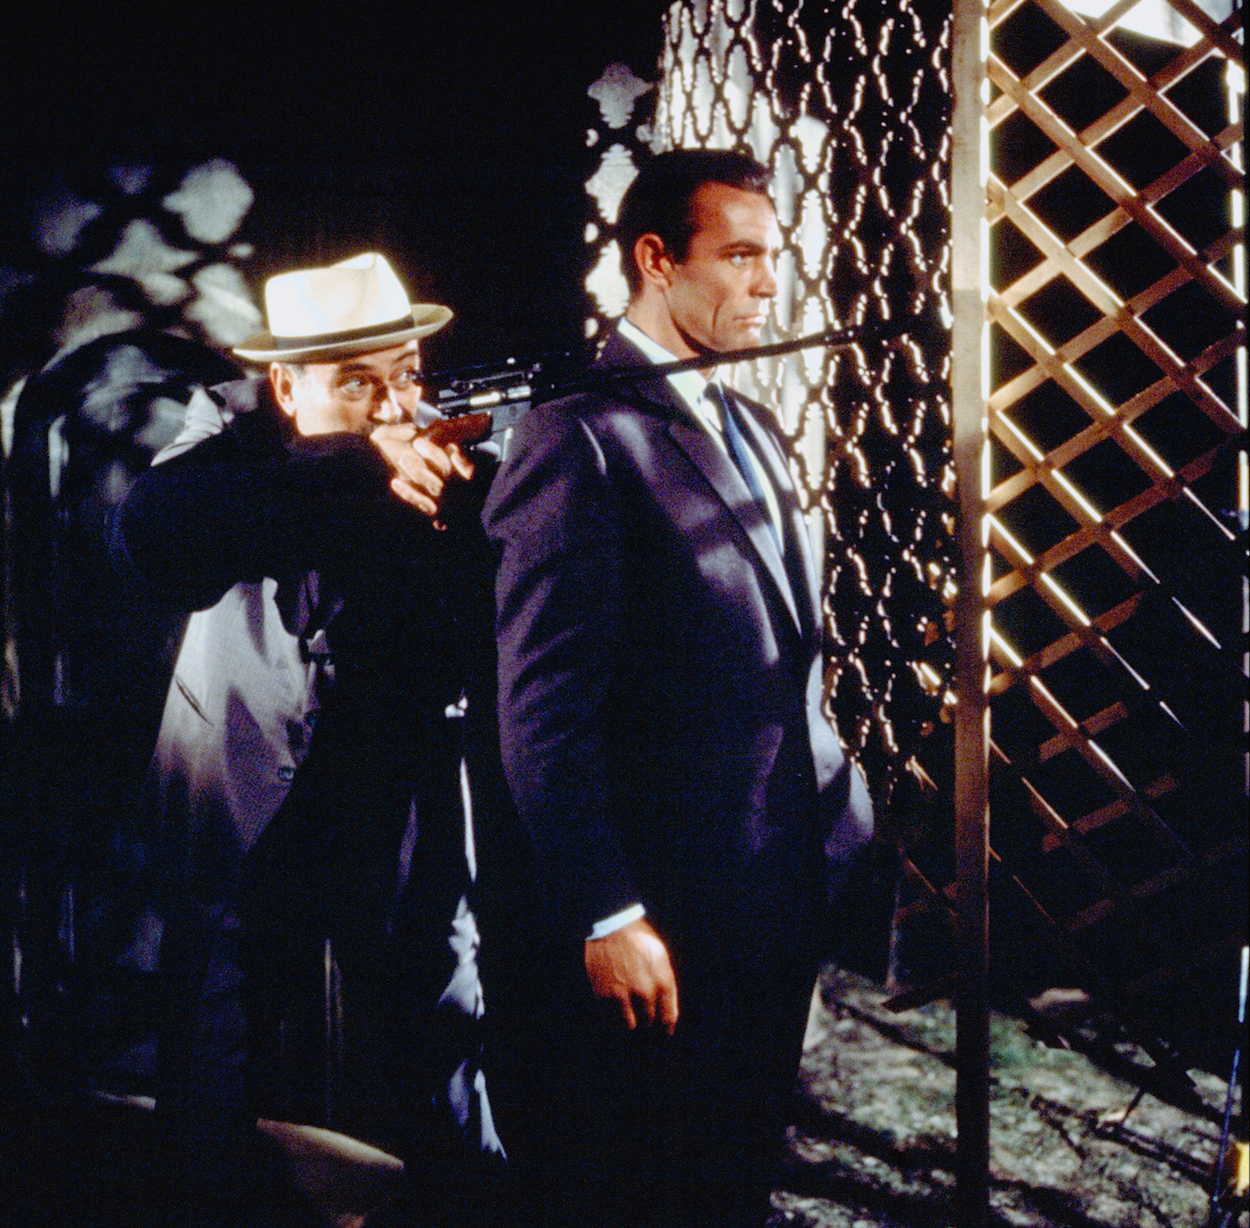 Pedro Armendáriz (left) and Sean Connery on the set of 'From Russia With Love.' Connery and Armendáriz shared several scenes, but Armendáriz never saw them as he died tragically before filming wrapped.